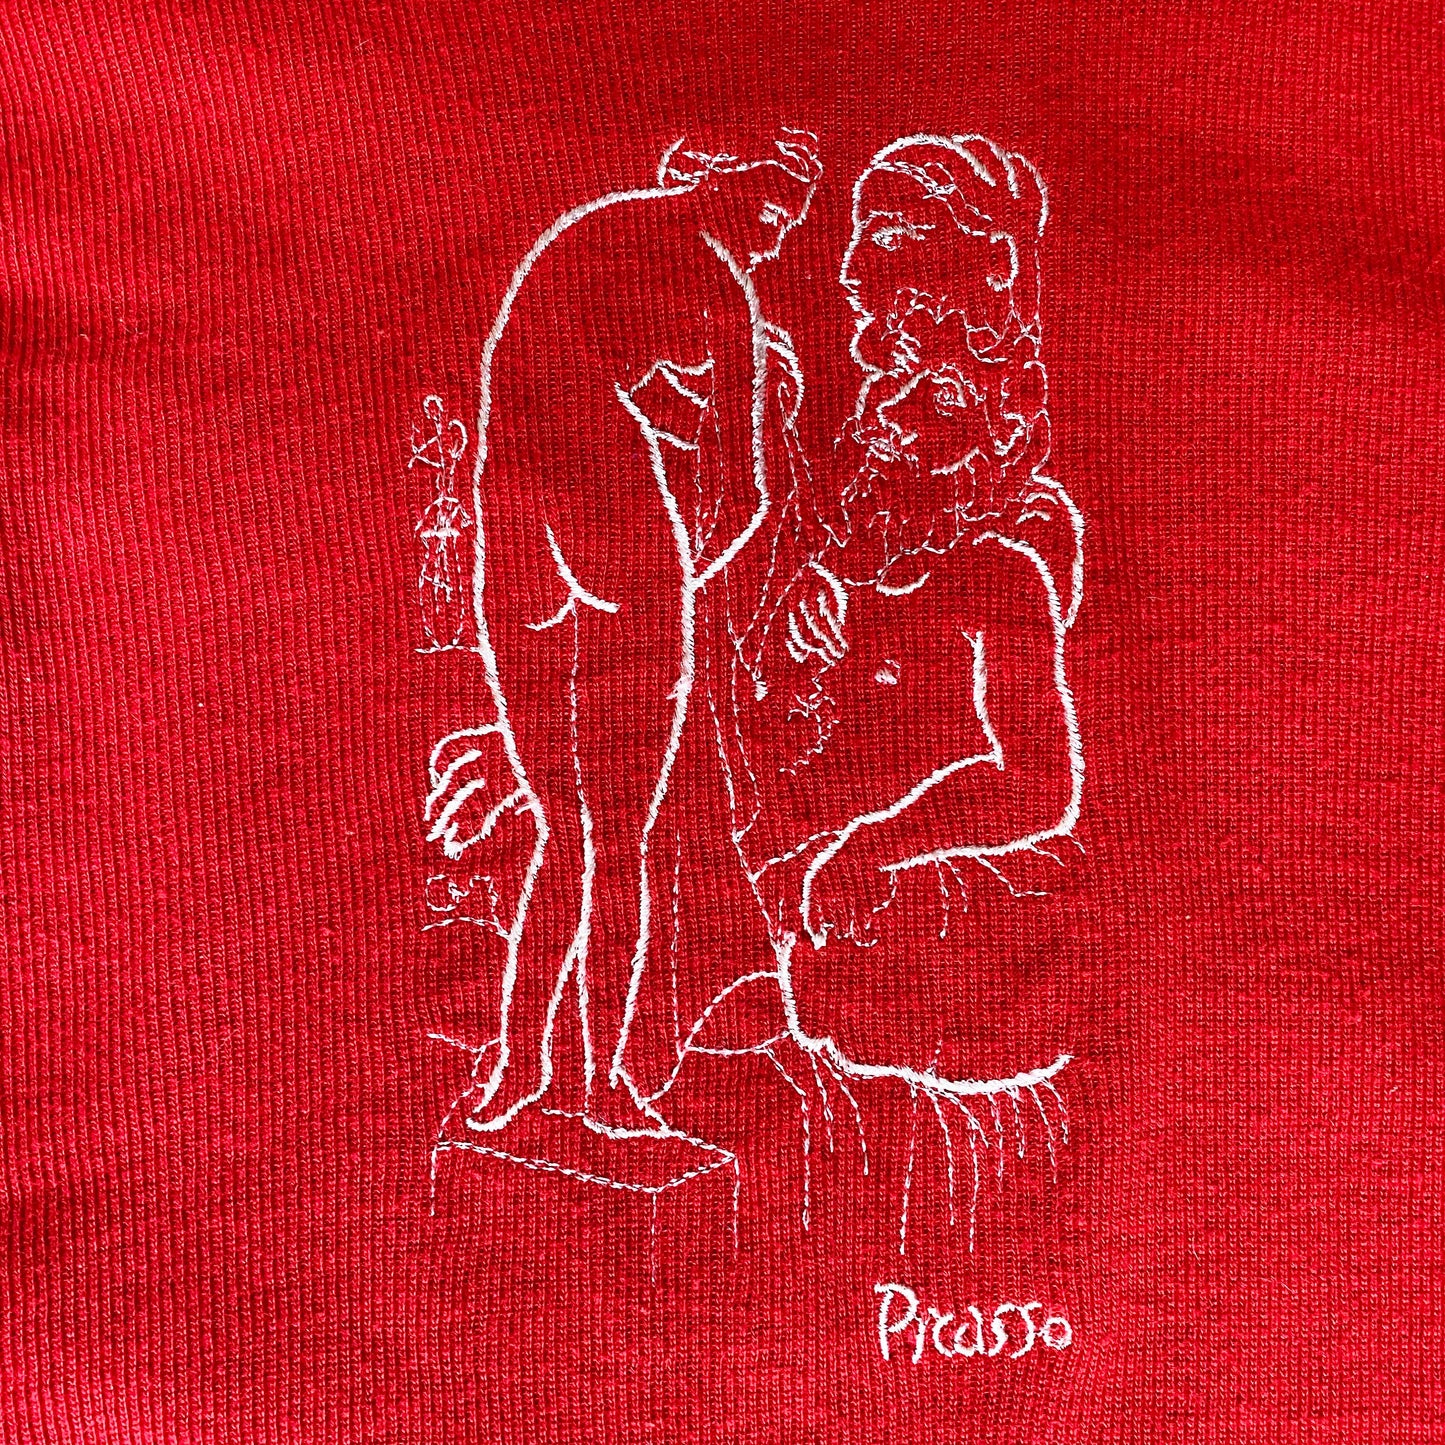 1970-1980s Pablo Picasso Figure Drawing Embroidered Red White Sweater Vintage 70s 80s Rare Knit Cezar Top Artist Art / Unisex Size Small